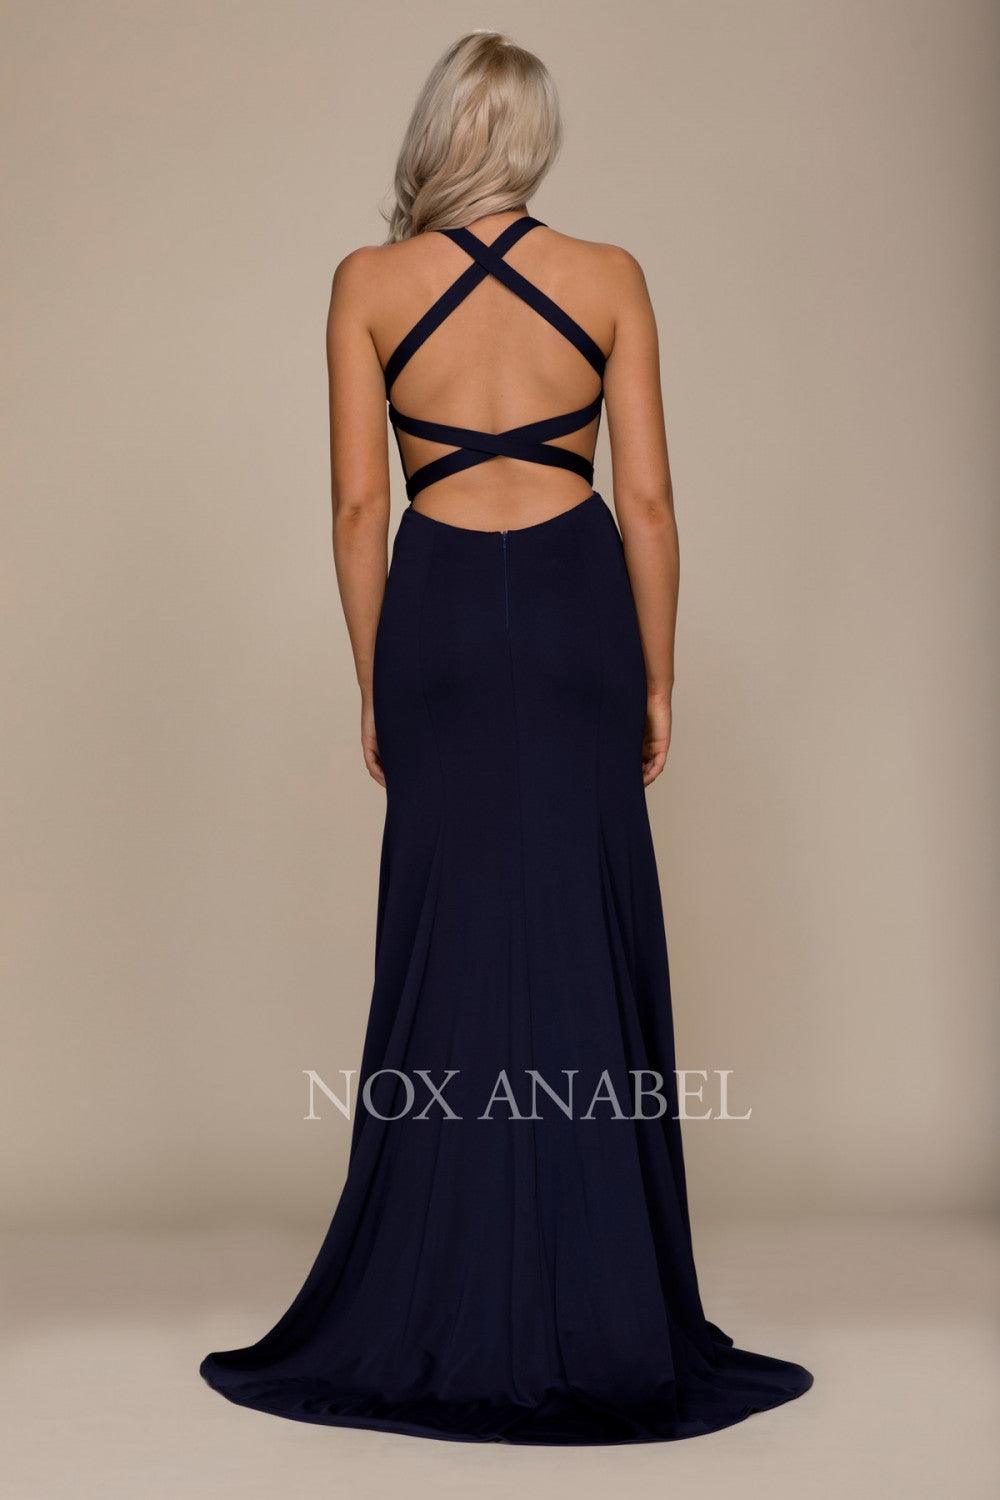 Long Sexy Prom Dress Formal Evening Gown - The Dress Outlet Nox Anabel